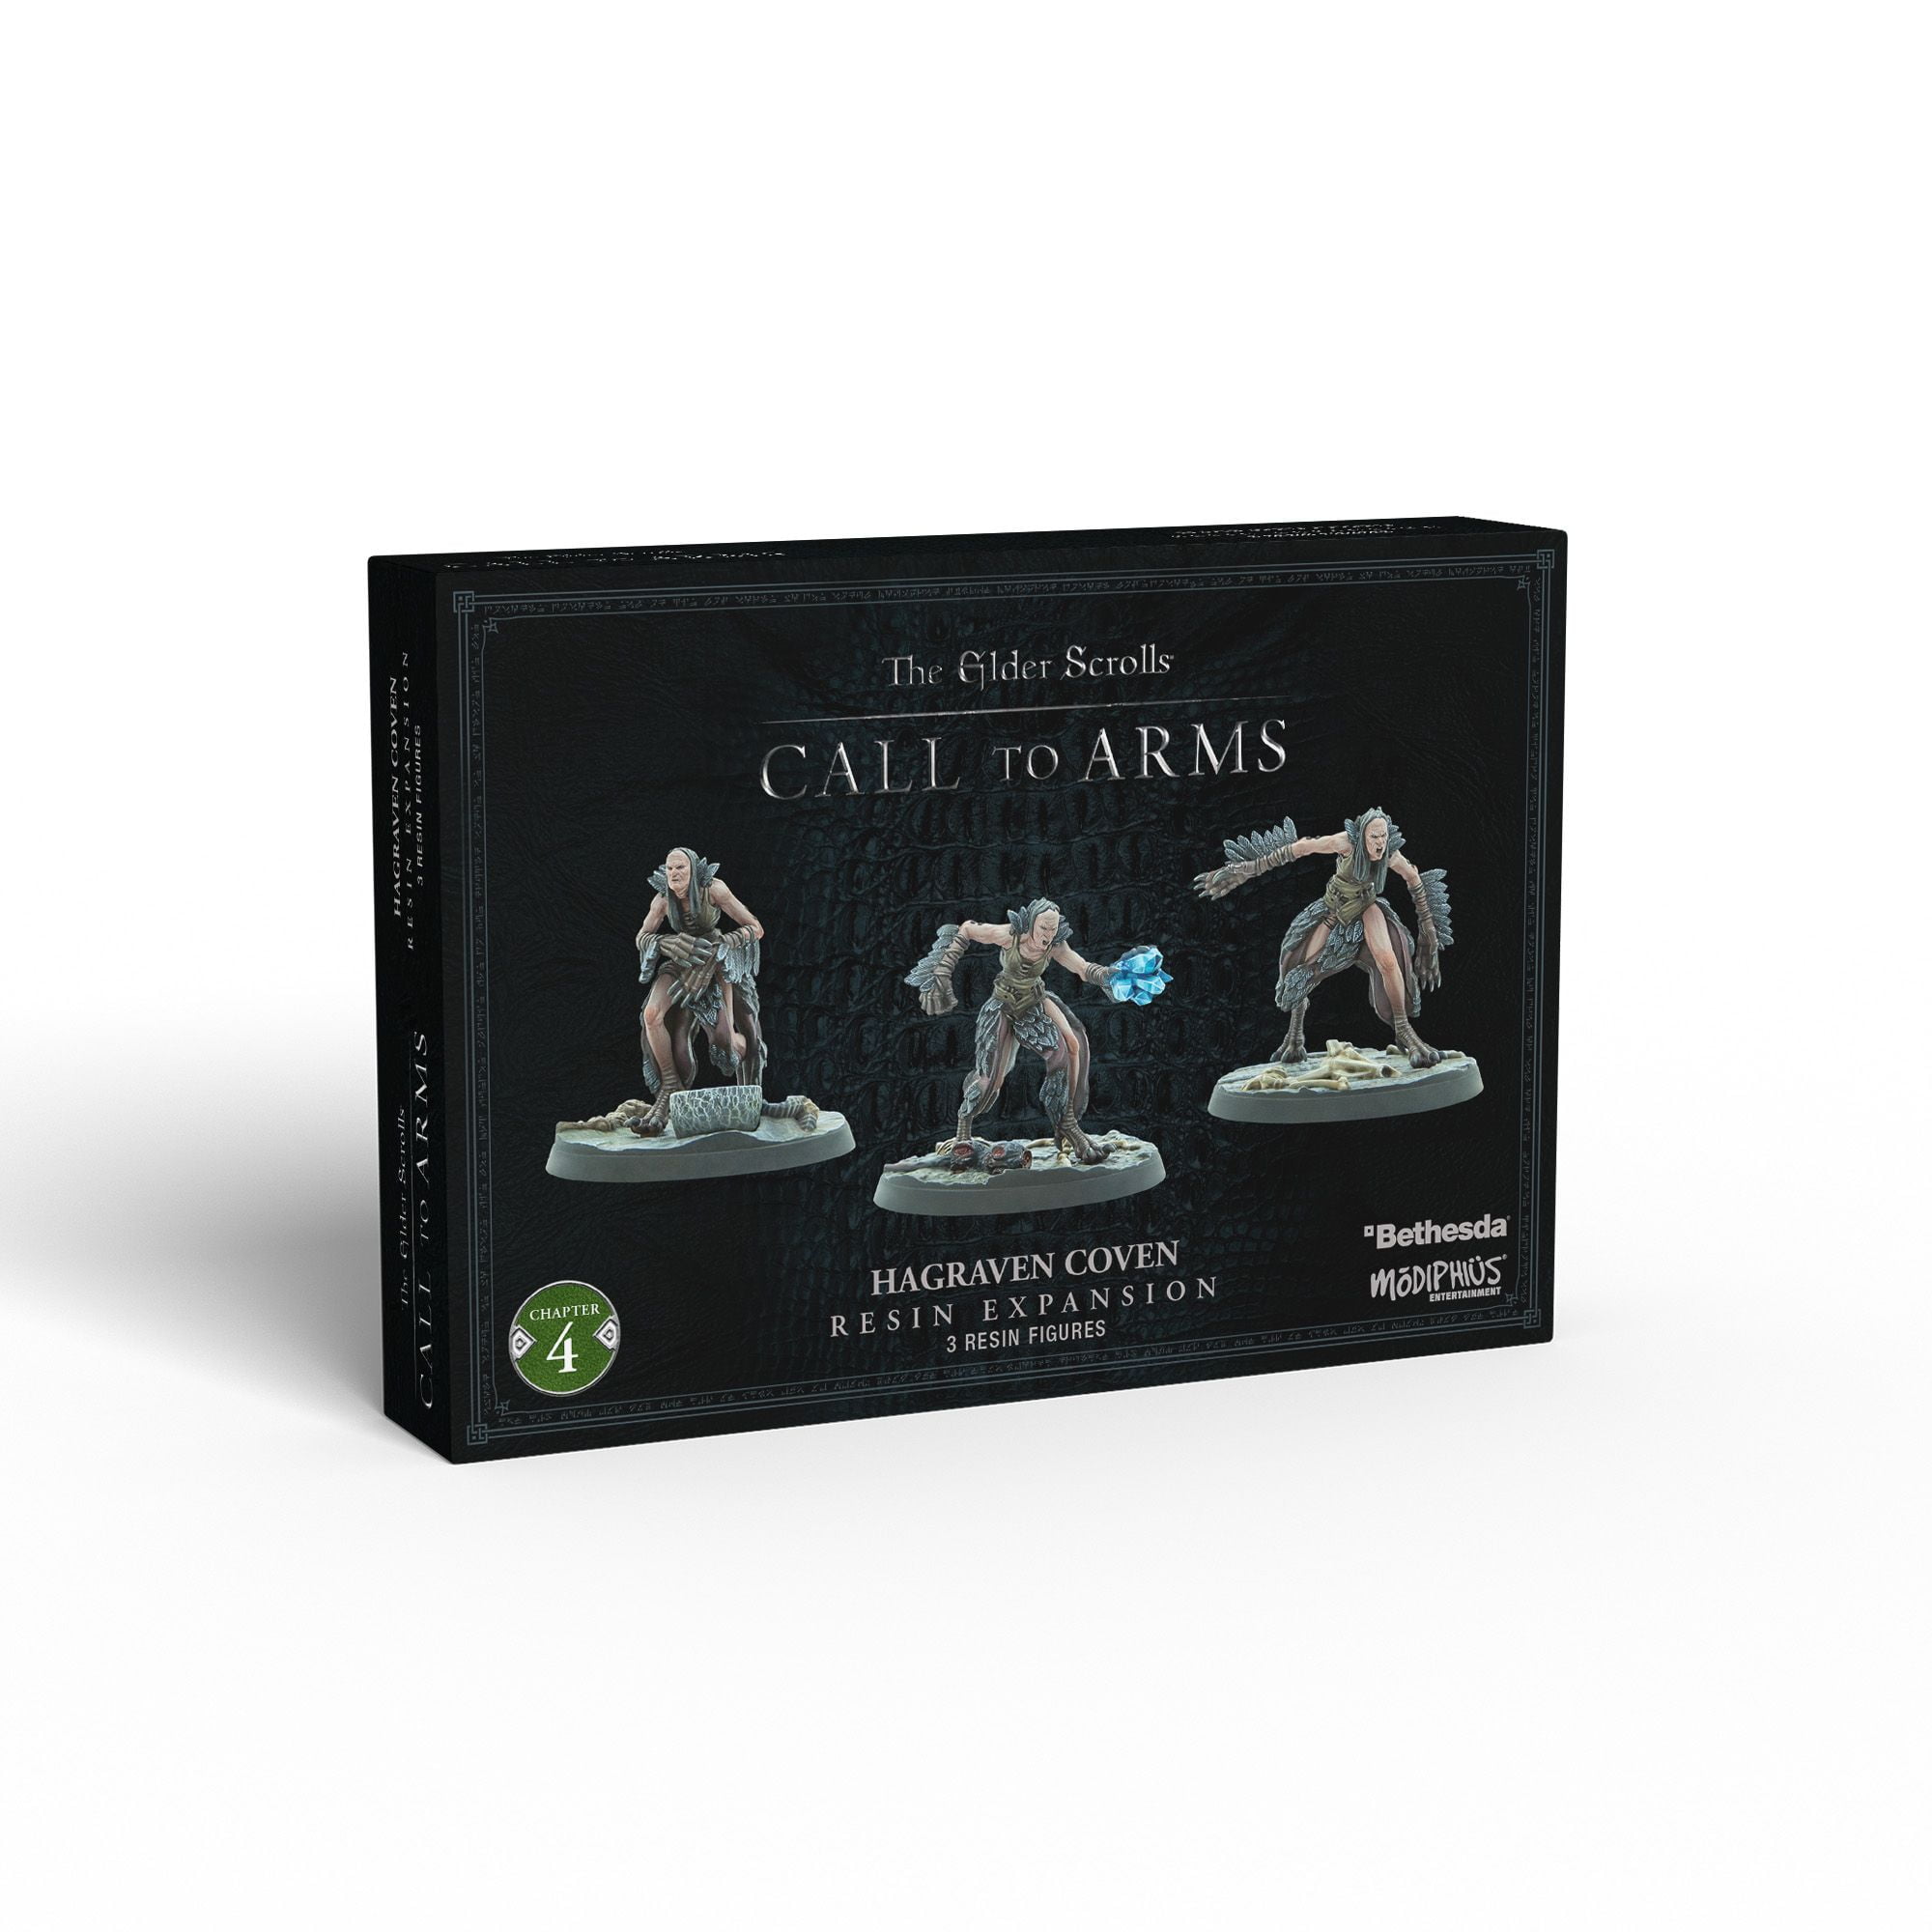 The Elder Scrolls: Call To Arms - Hagraven Coven